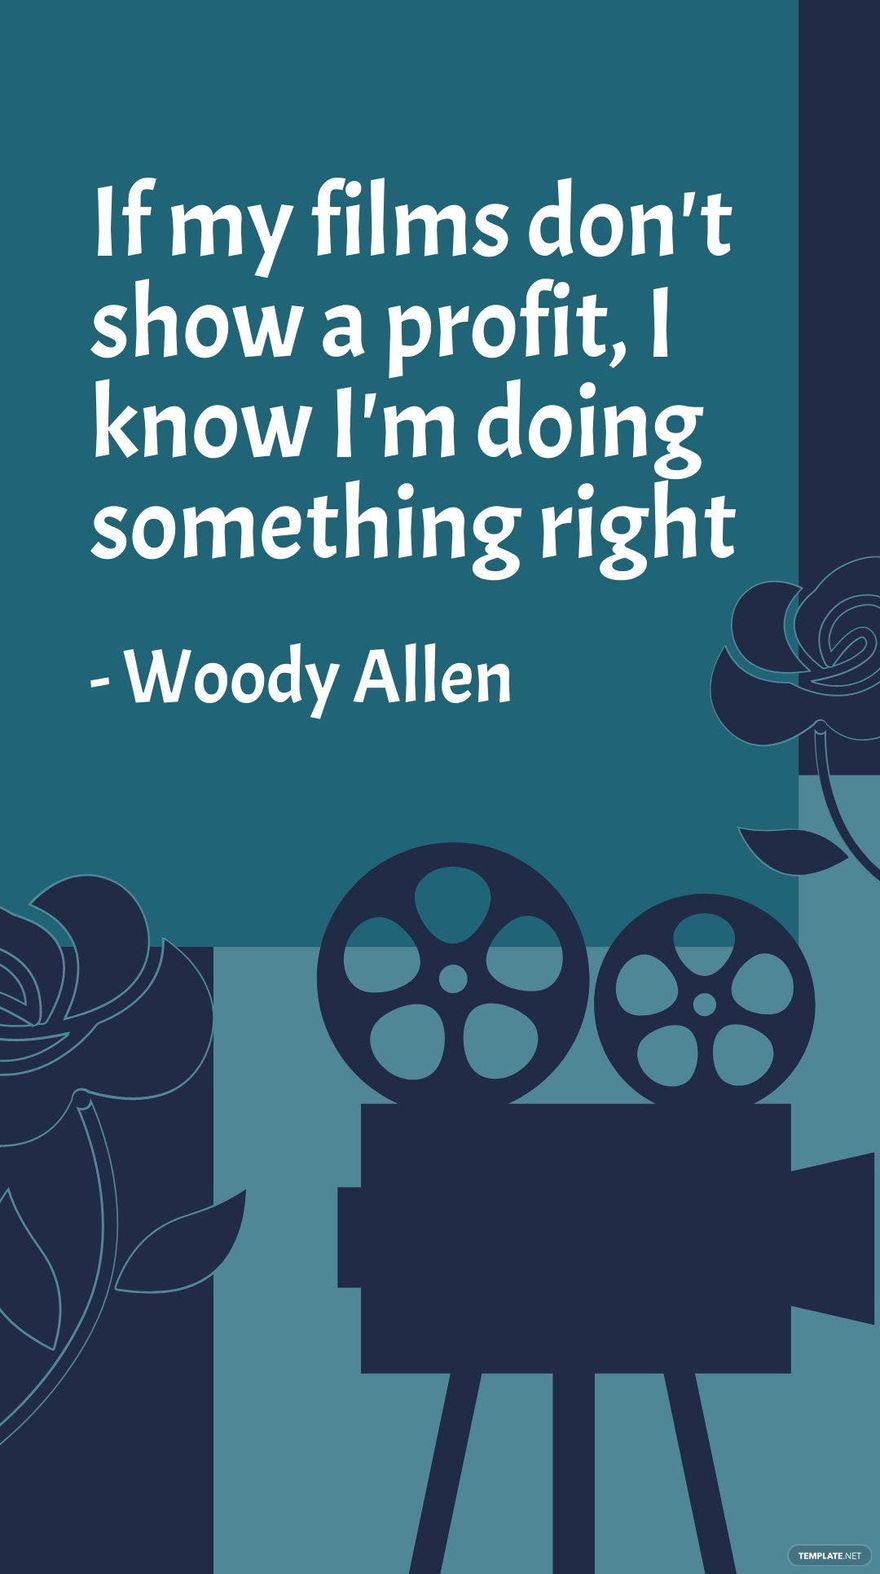 Free Woody Allen - If my films don't show a profit, I know I'm doing something right in JPG